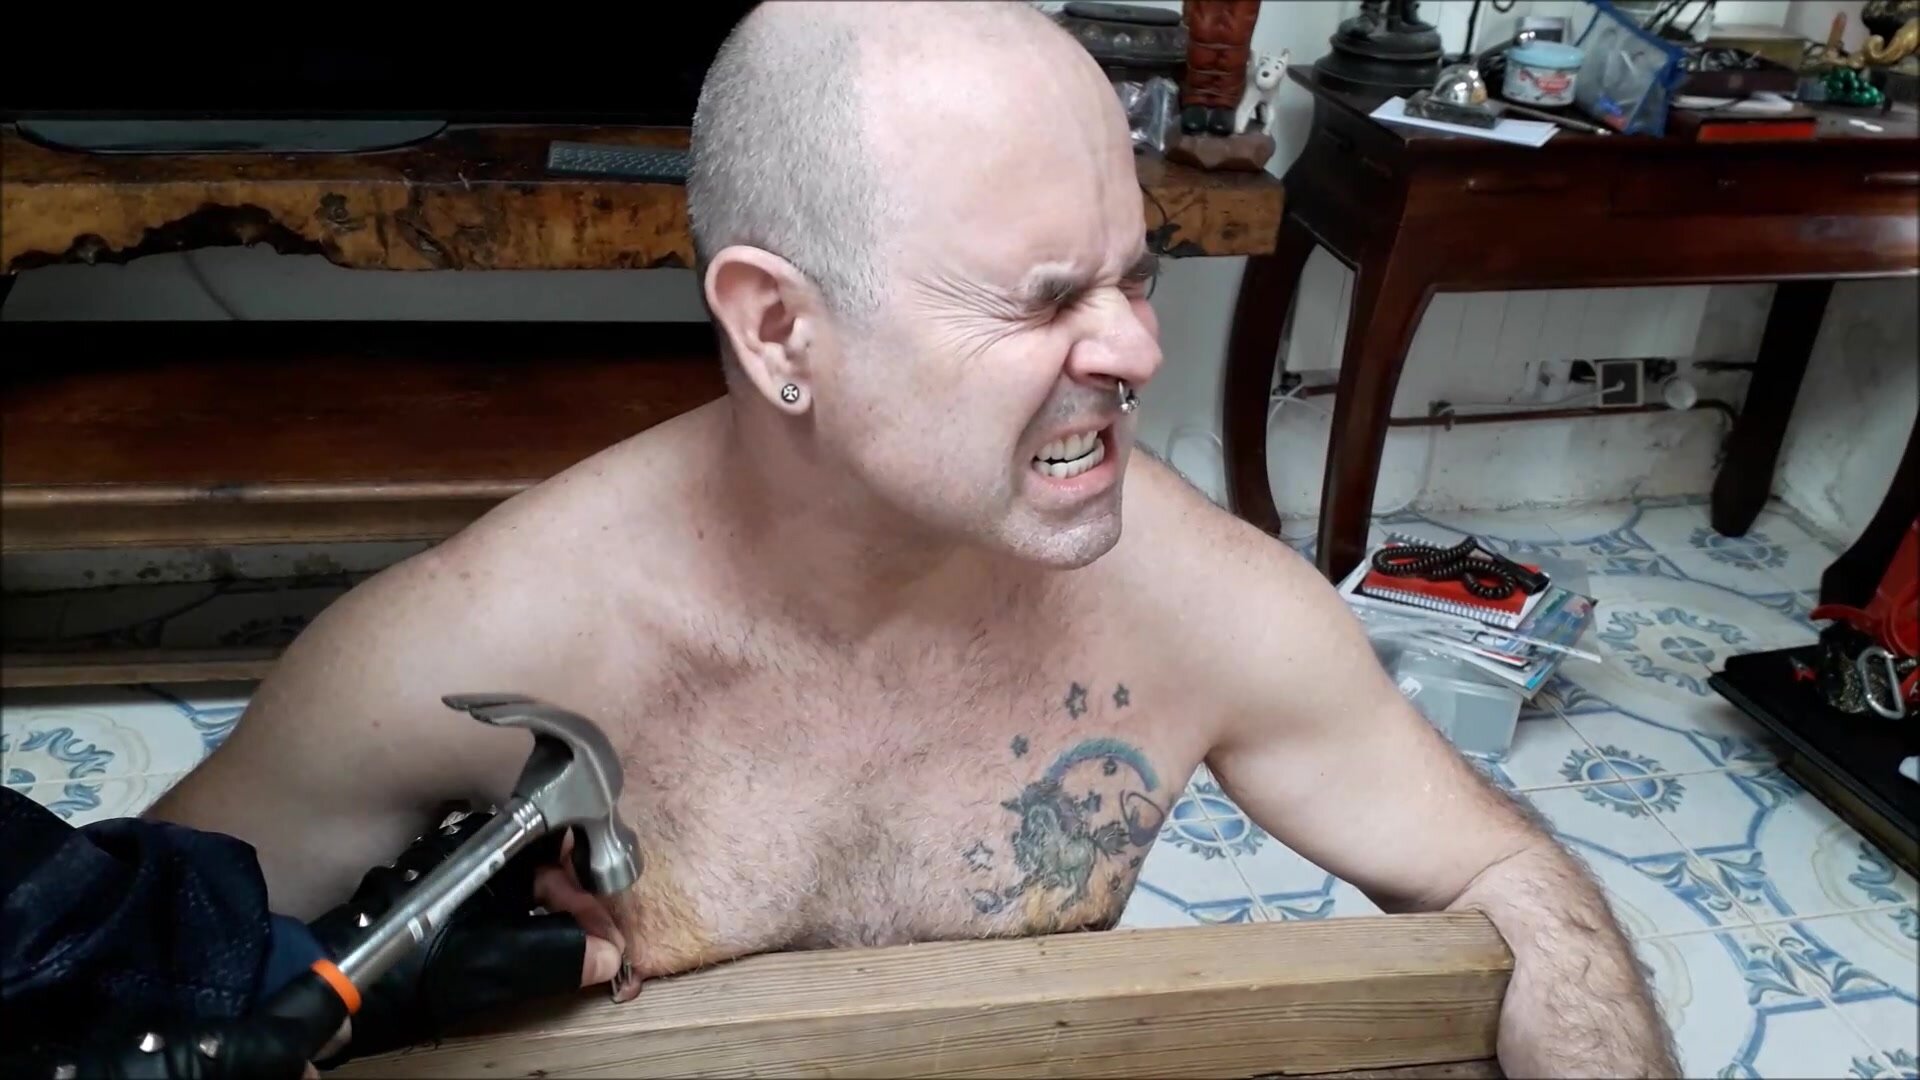 4 nails in the bastard's nipples